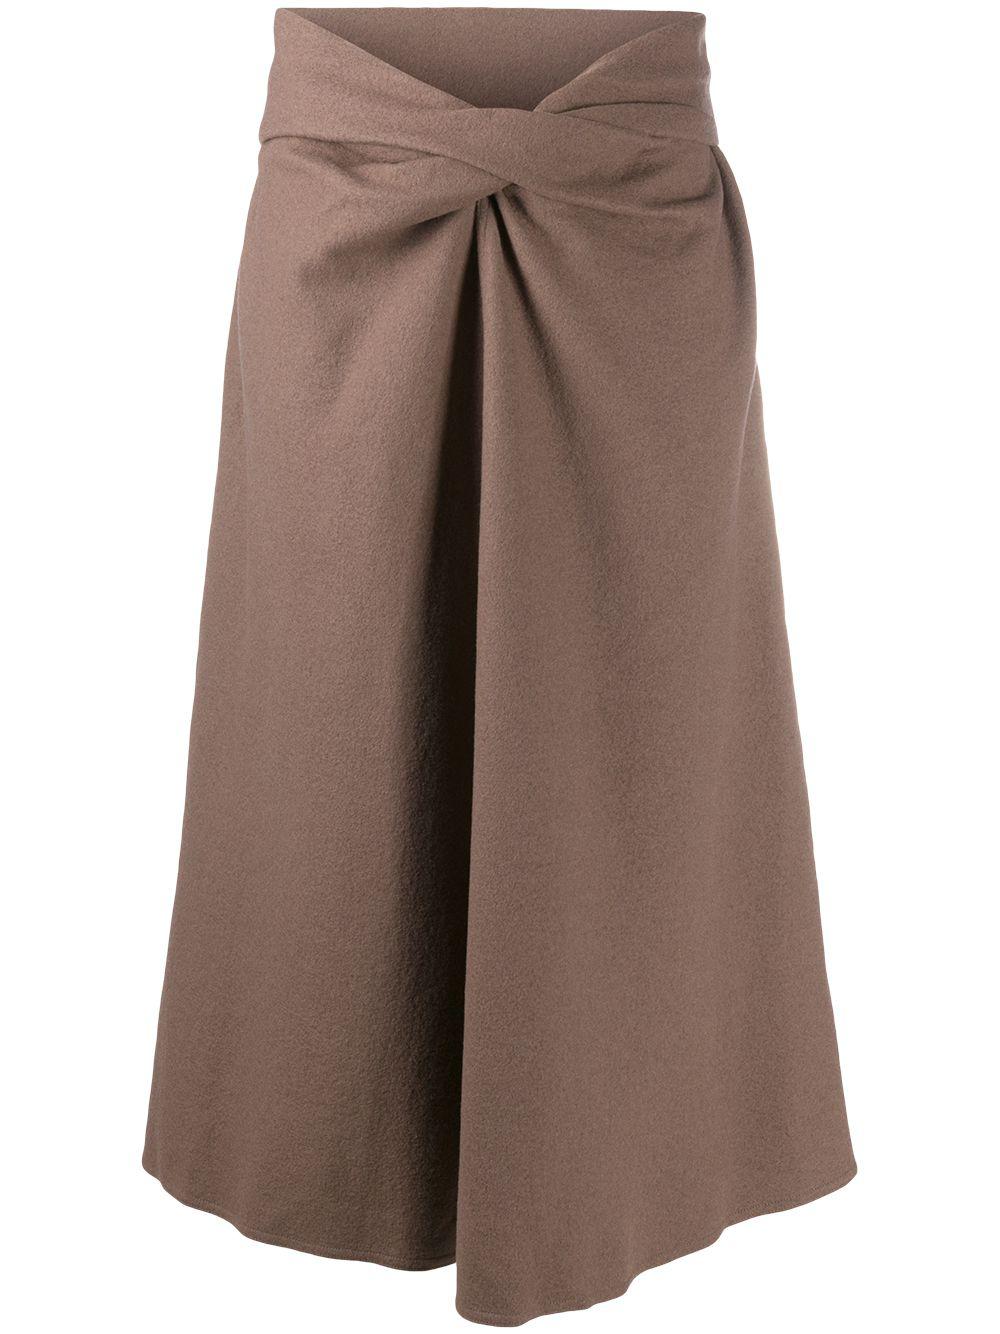 twist detail midi skirt by LEMAIRE